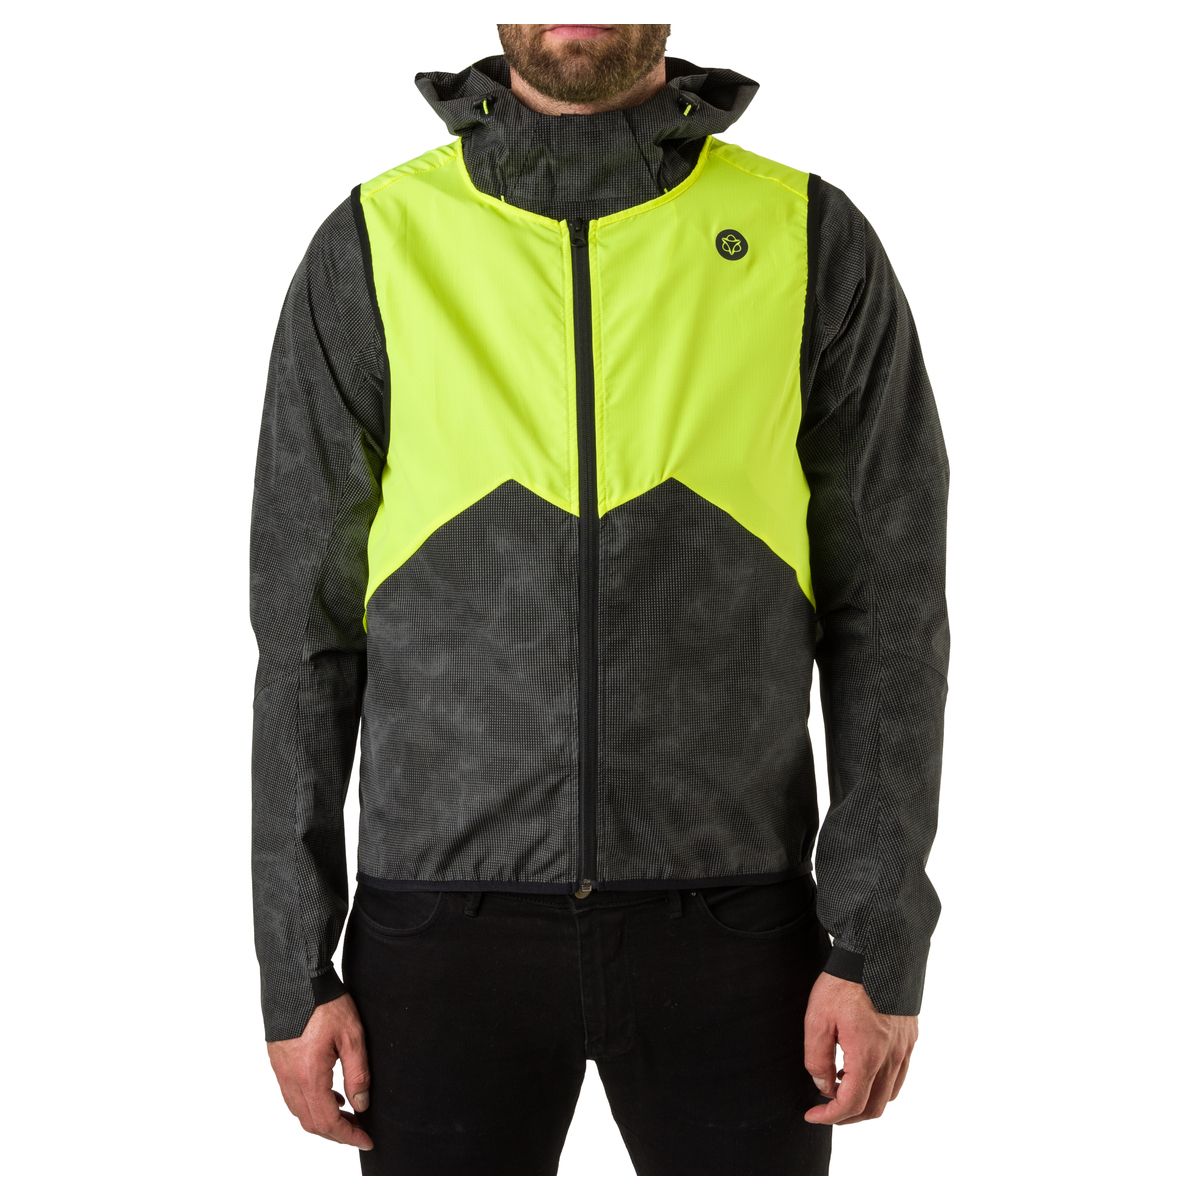 Compact Gilet Commuter Hi-vis & Reflection fit example